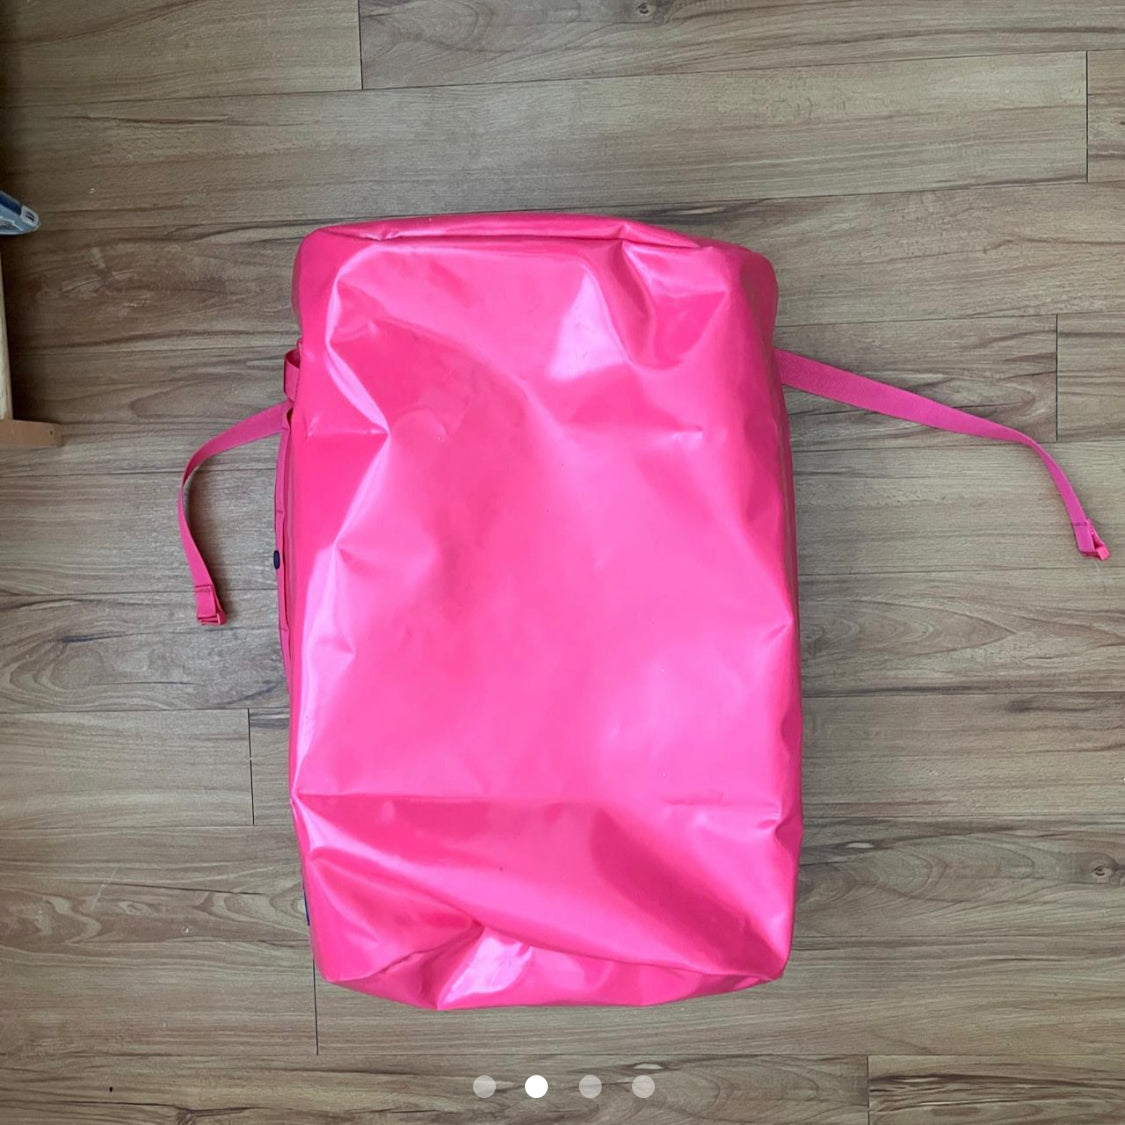 Pink carry-on bag